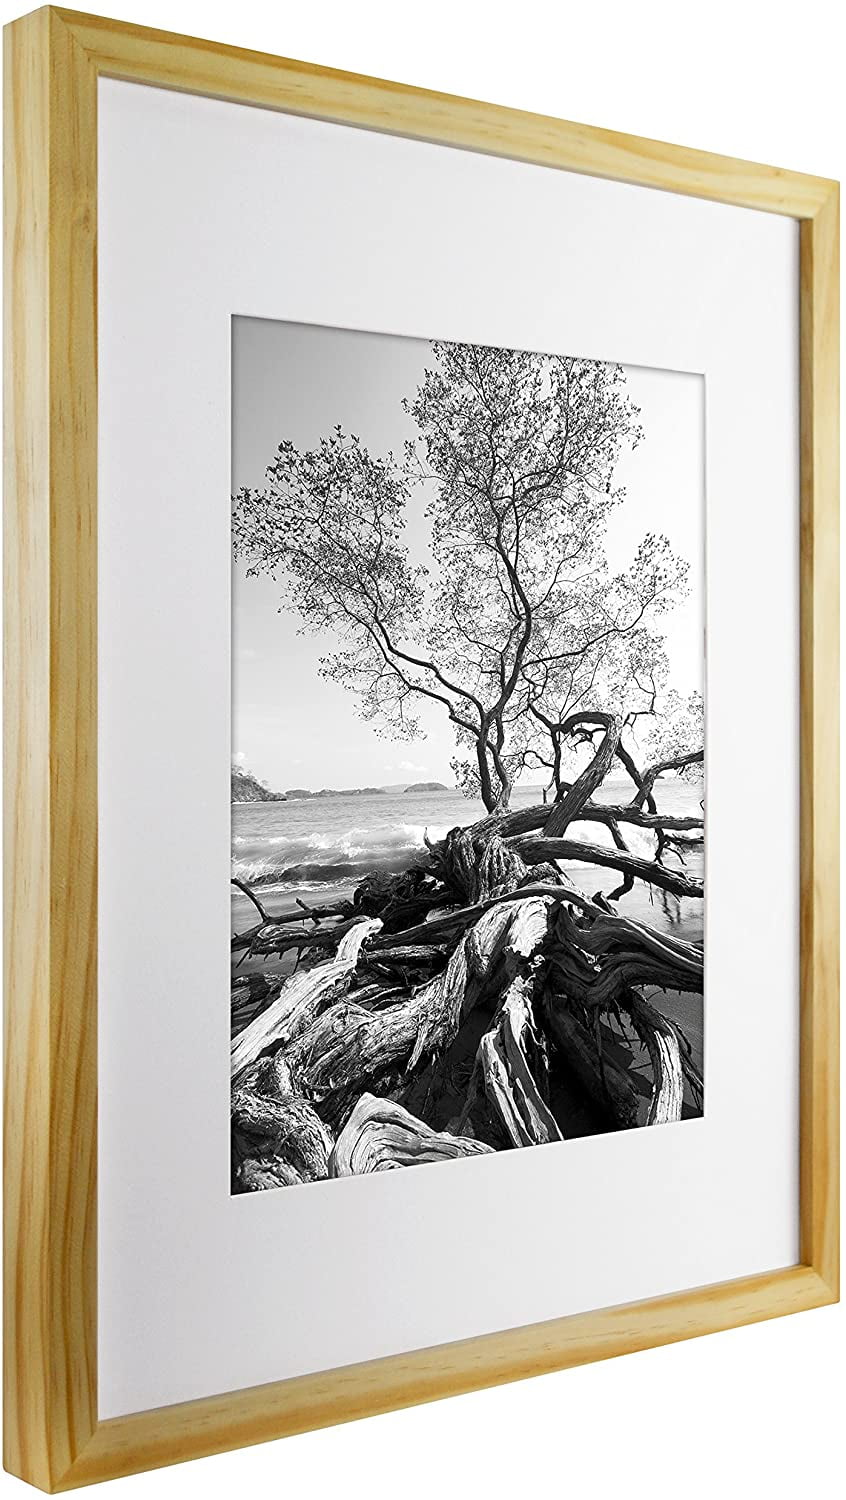 Heritage Wood Frame 16x20 Matted To 8x10 In Dark Natural